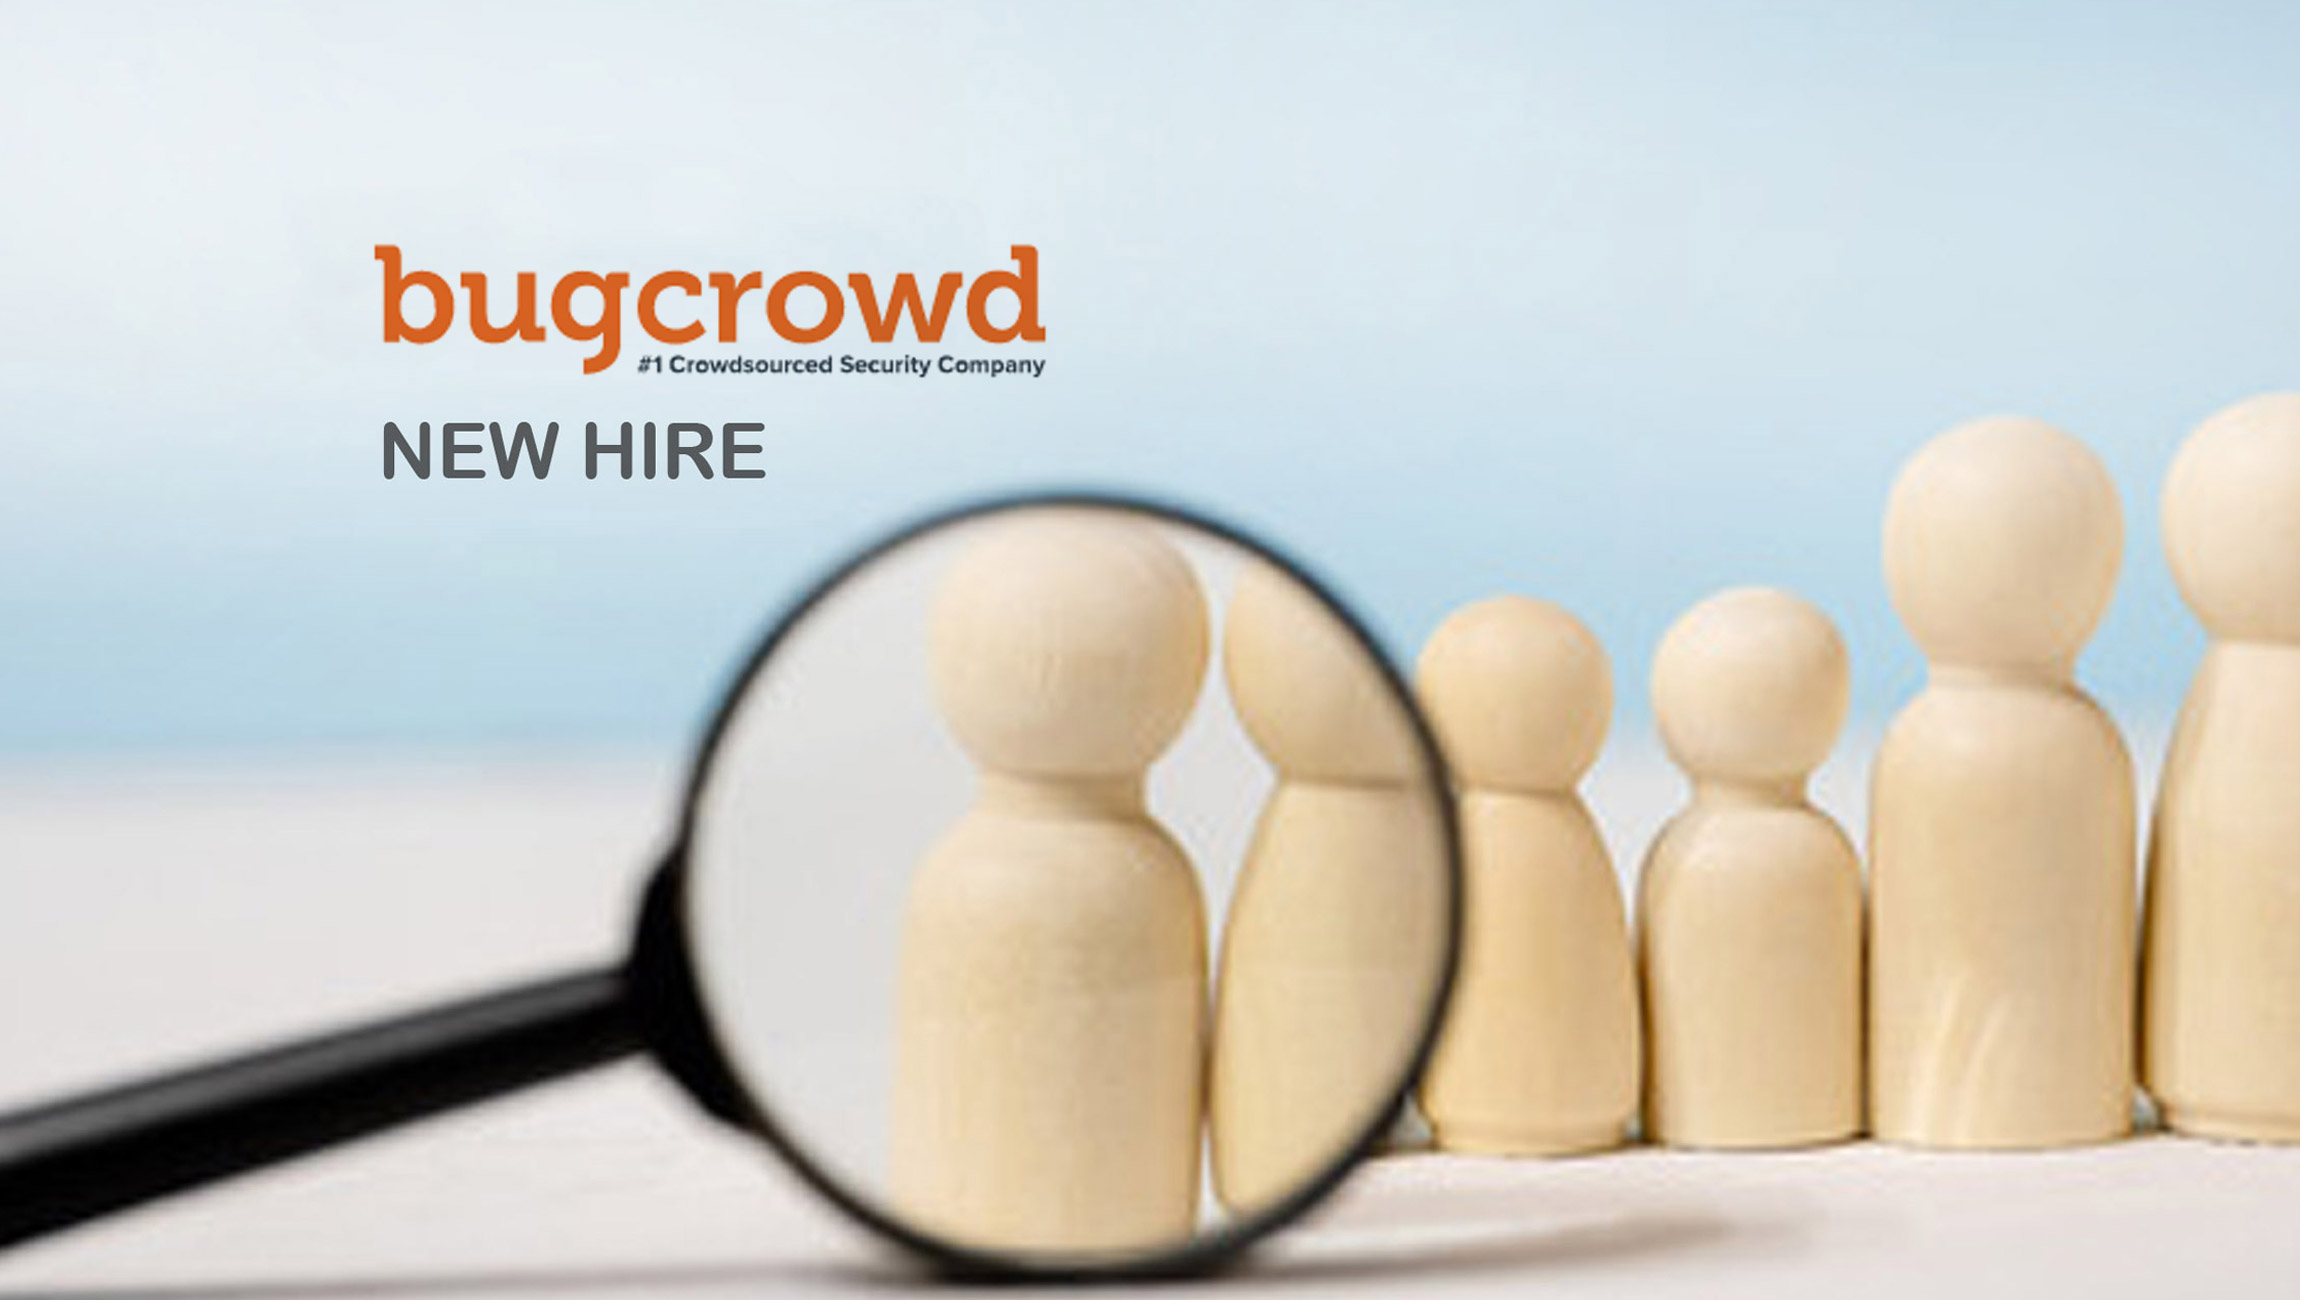 Bugcrowd Expands Executive Team with Addition of Dave Gerry as Chief Operating Officer